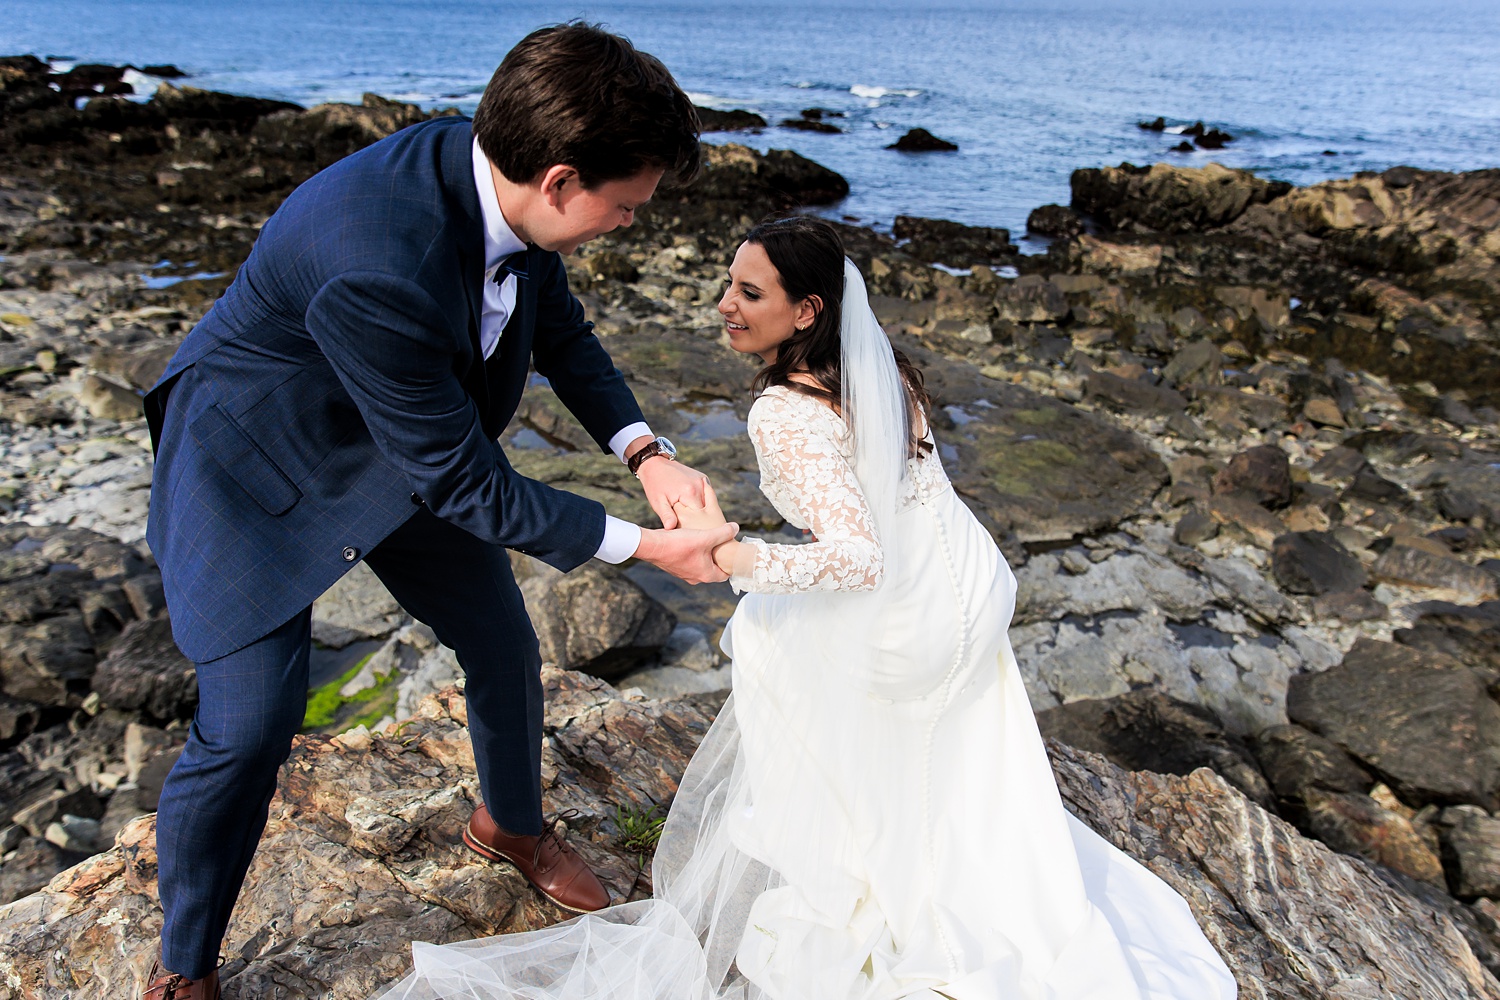 The groom helps the bride up the rocks of Marginal Way